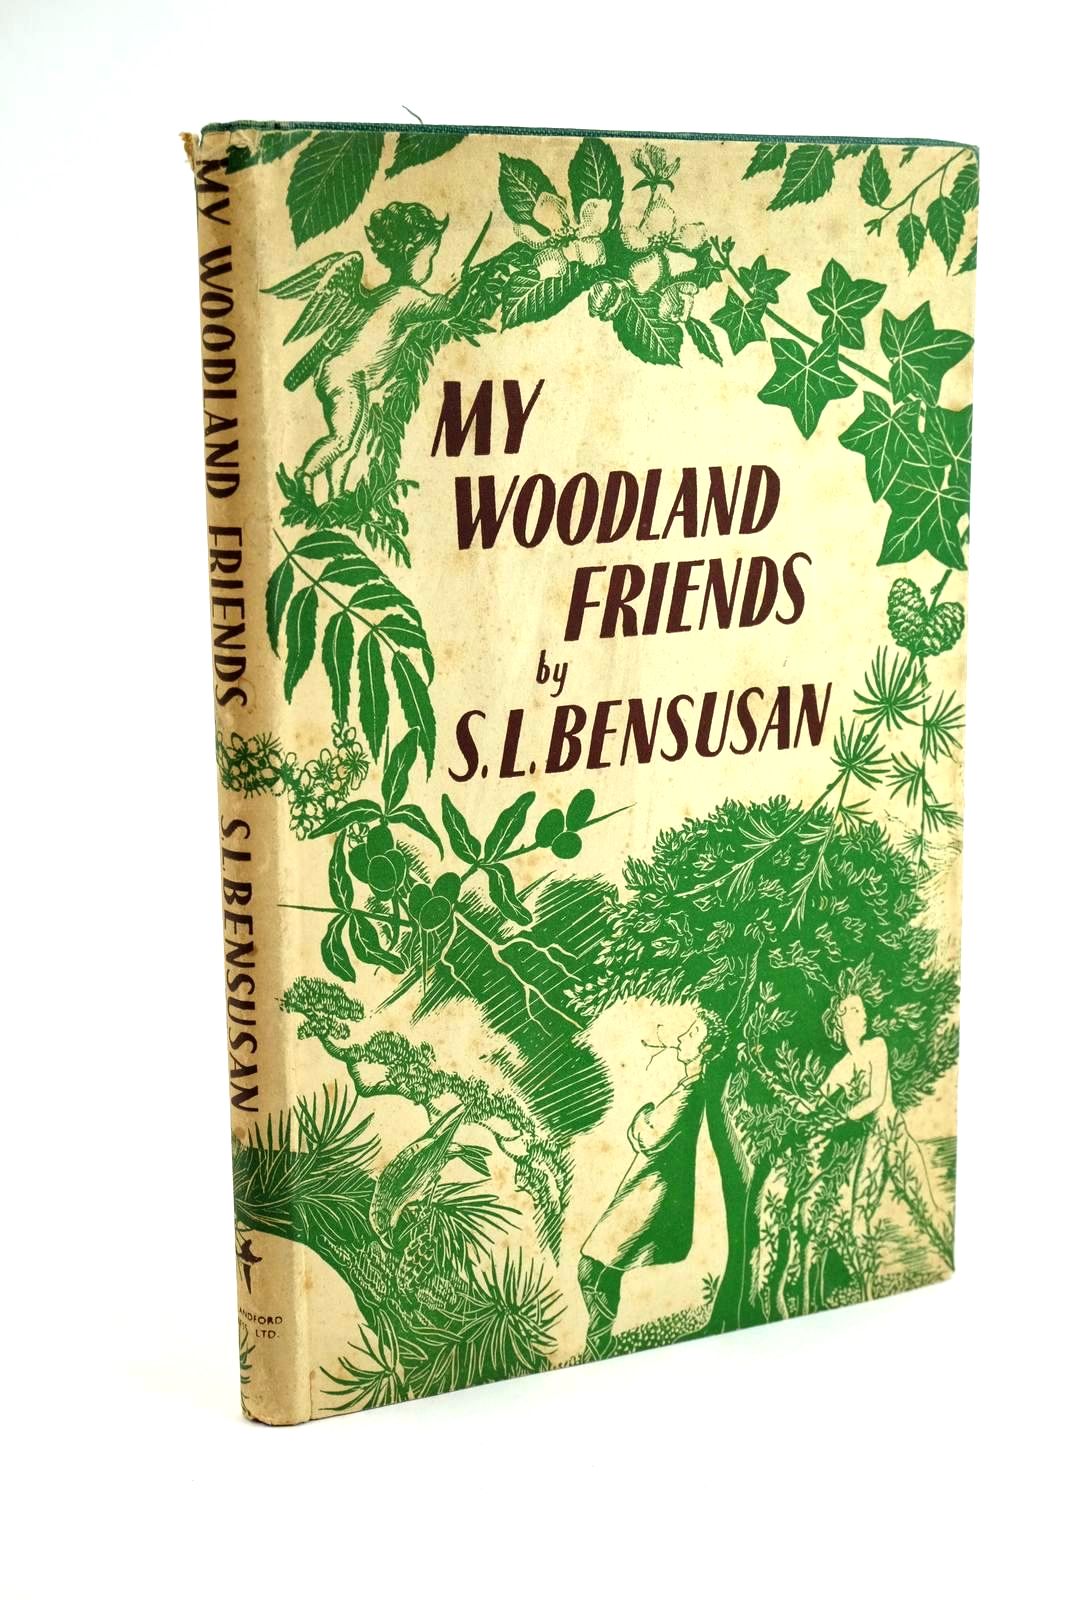 Photo of MY WOODLAND FRIENDS written by Bensusan, S.L. illustrated by Rickarby, Joan published by Blandford Press Ltd. (STOCK CODE: 1323382)  for sale by Stella & Rose's Books